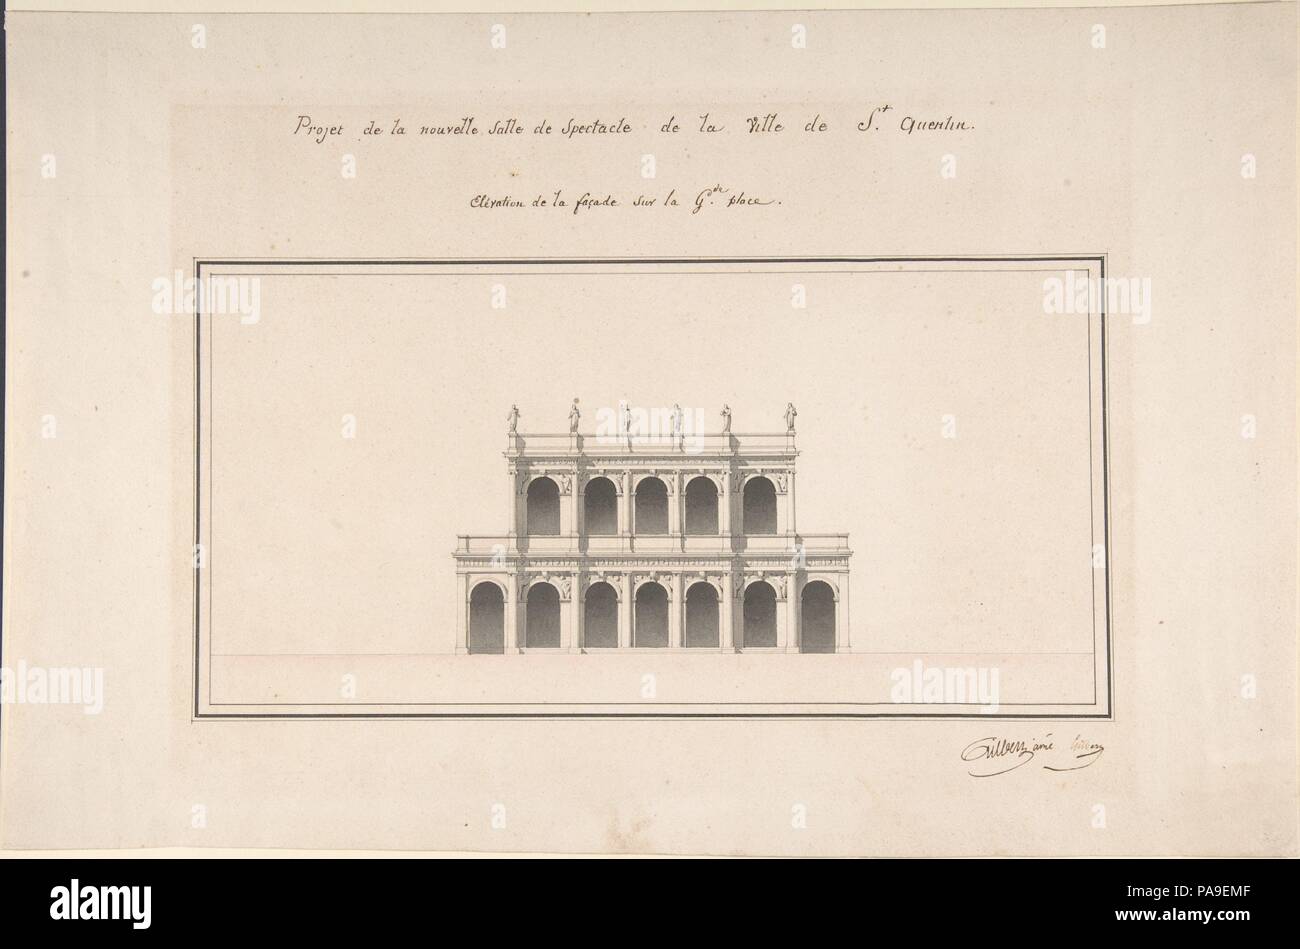 Project for the New Theater at St. Quentin (Aisne) - Elevation. Architect: Designed by Emile-Jacques Gilbert (French, 1793-1874); Designed by Louis Baptiste Gilbert (French). Dimensions: 11.5 x 6.75 in.  (29.2 x 17.1 cm). Date: ca. 1841. Museum: Metropolitan Museum of Art, New York, USA. Stock Photo